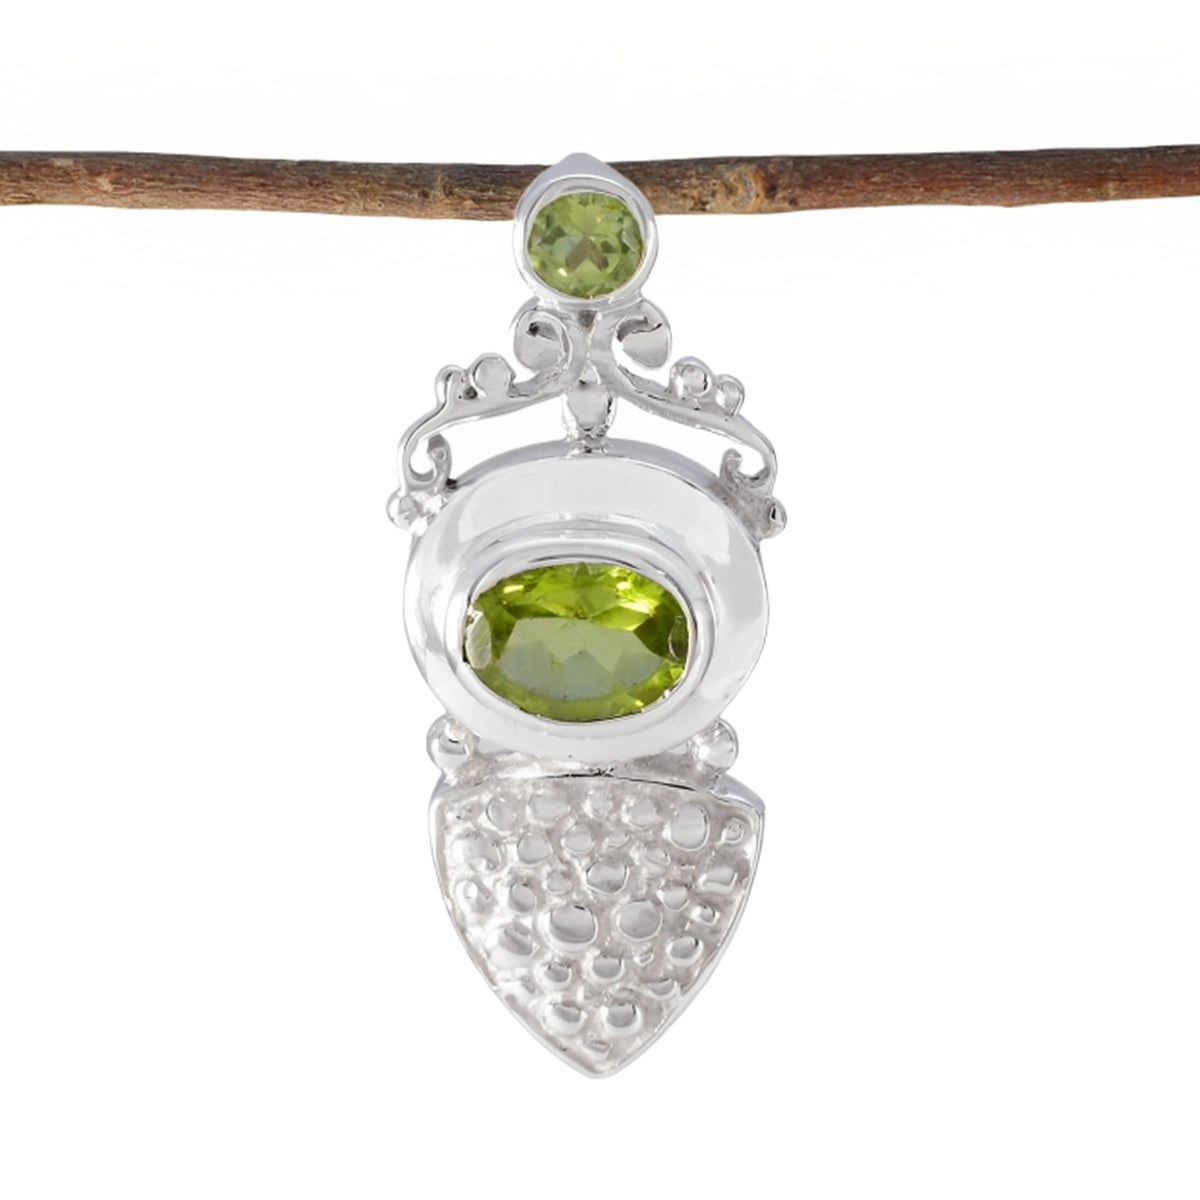 Riyo Attractive Gemstone Multi Faceted Green Peridot Sterling Silver Pendant Gift For Christmas